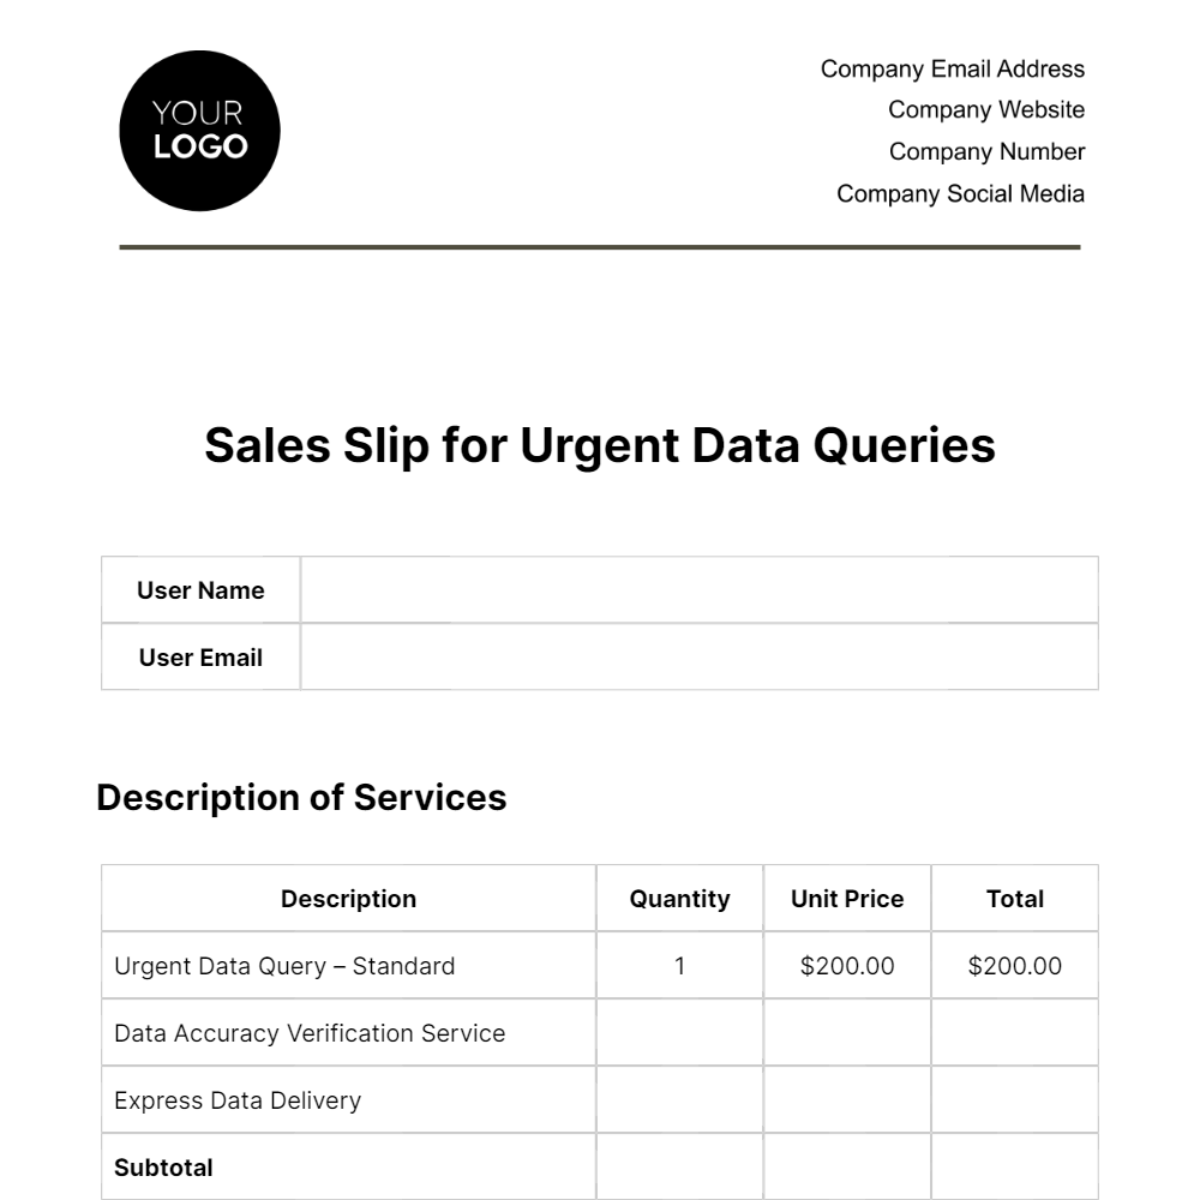 Free Sales Slip for Urgent Data Queries Template